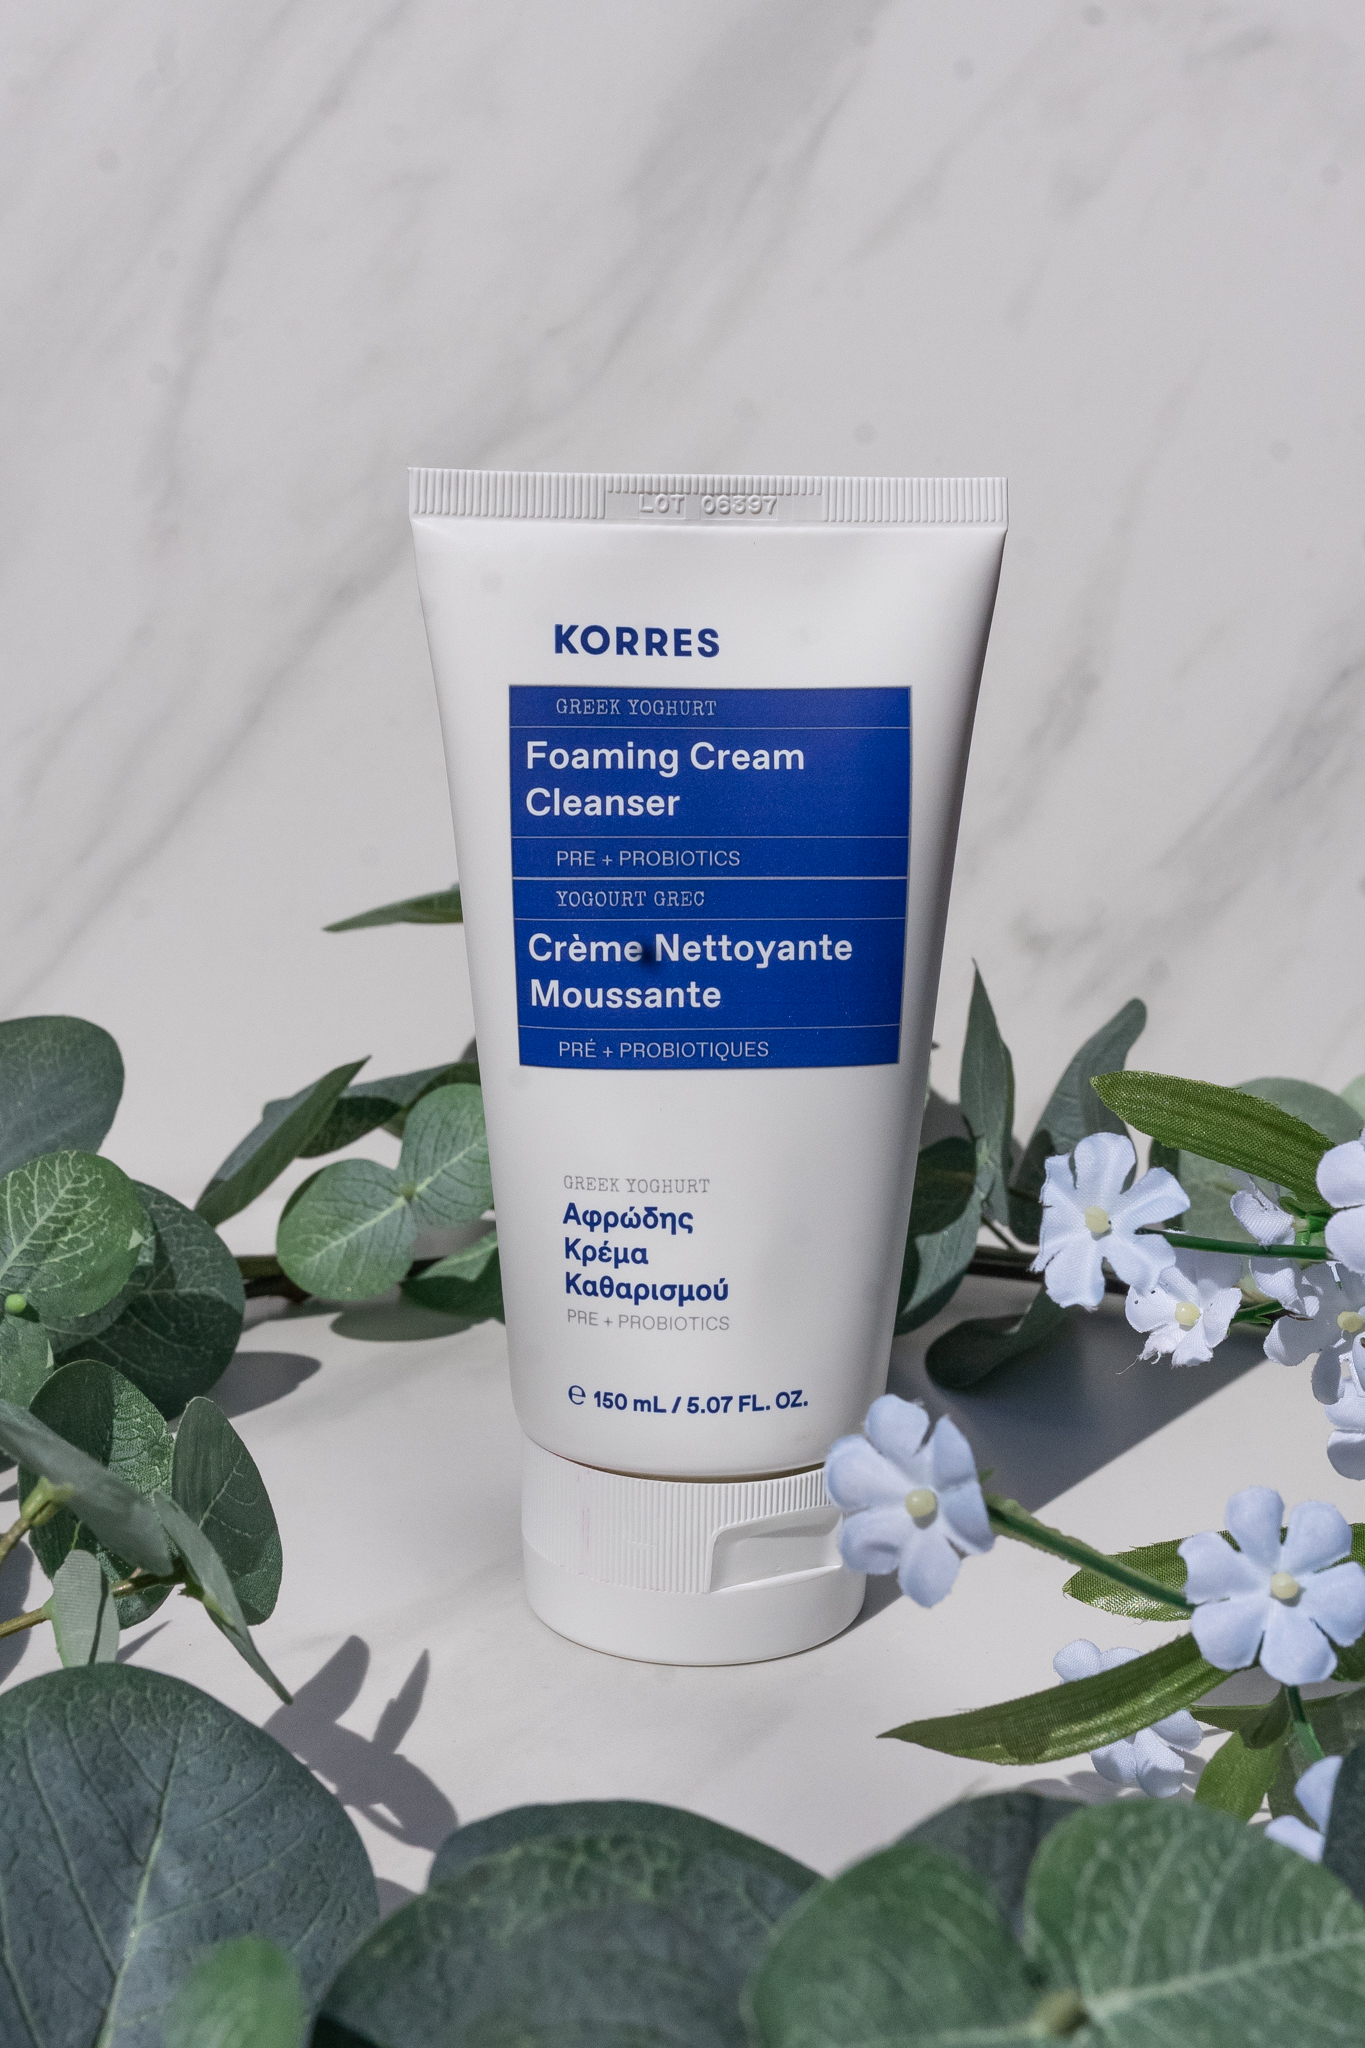 Low pH cleanser